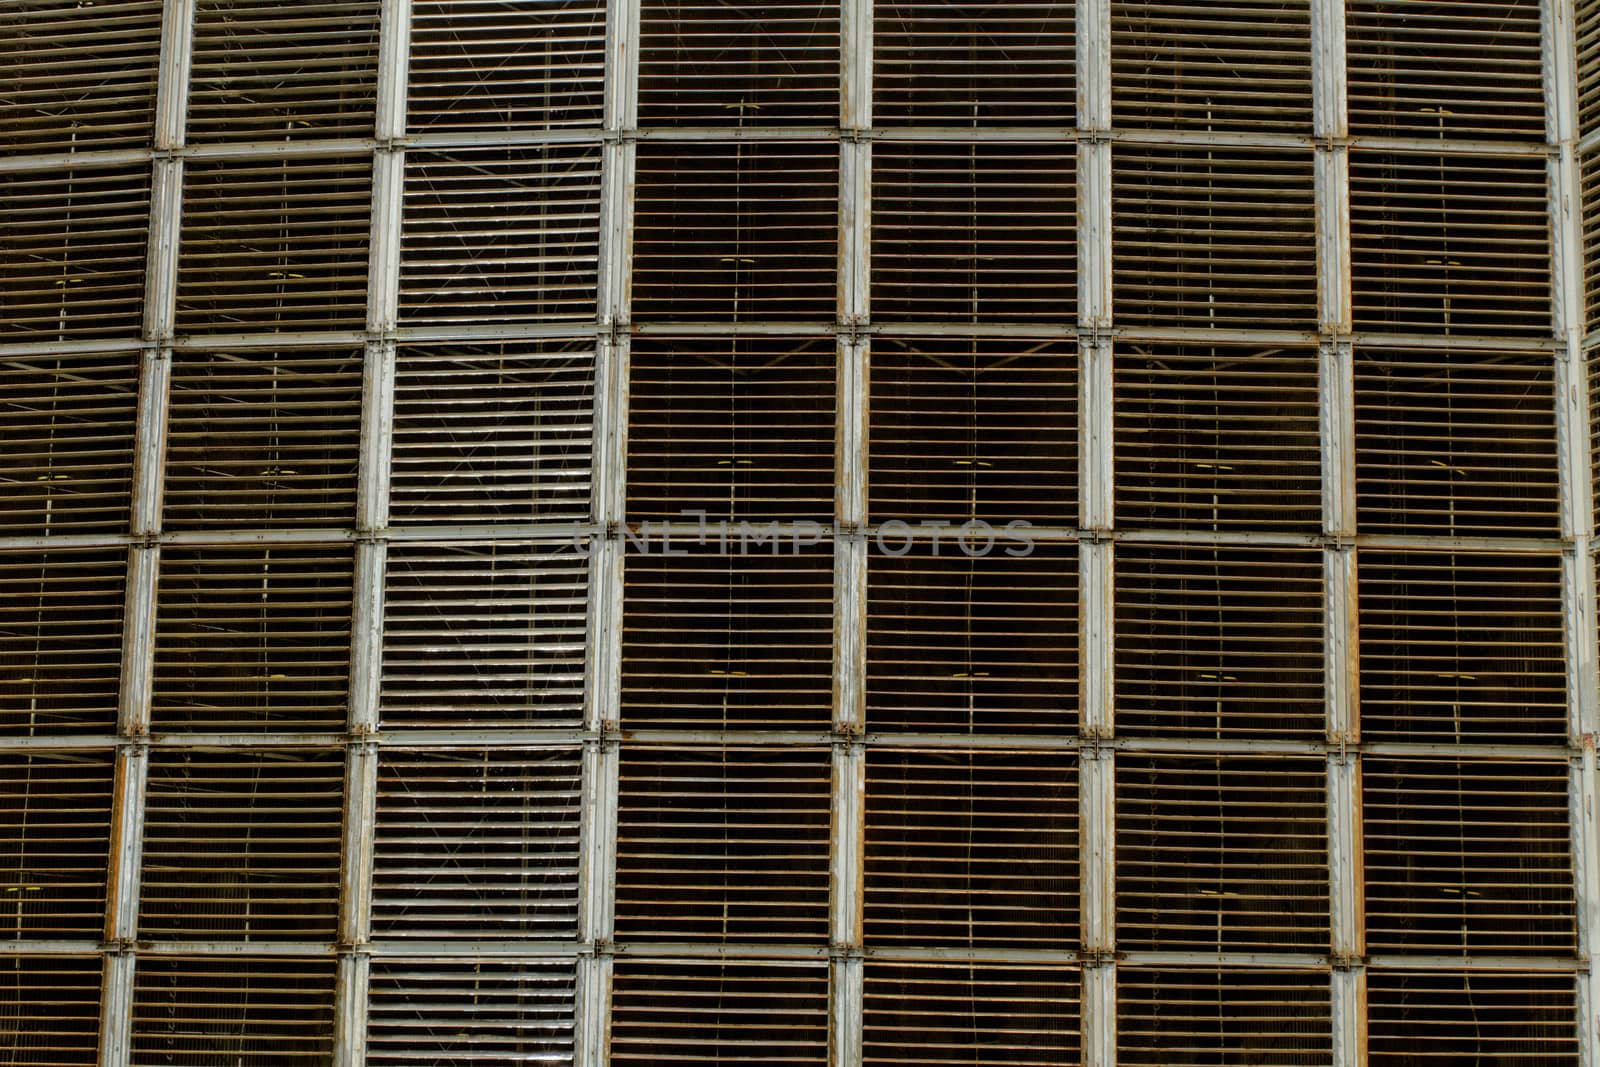 Details of a huge cooling towers of a power plant (cooling fins)